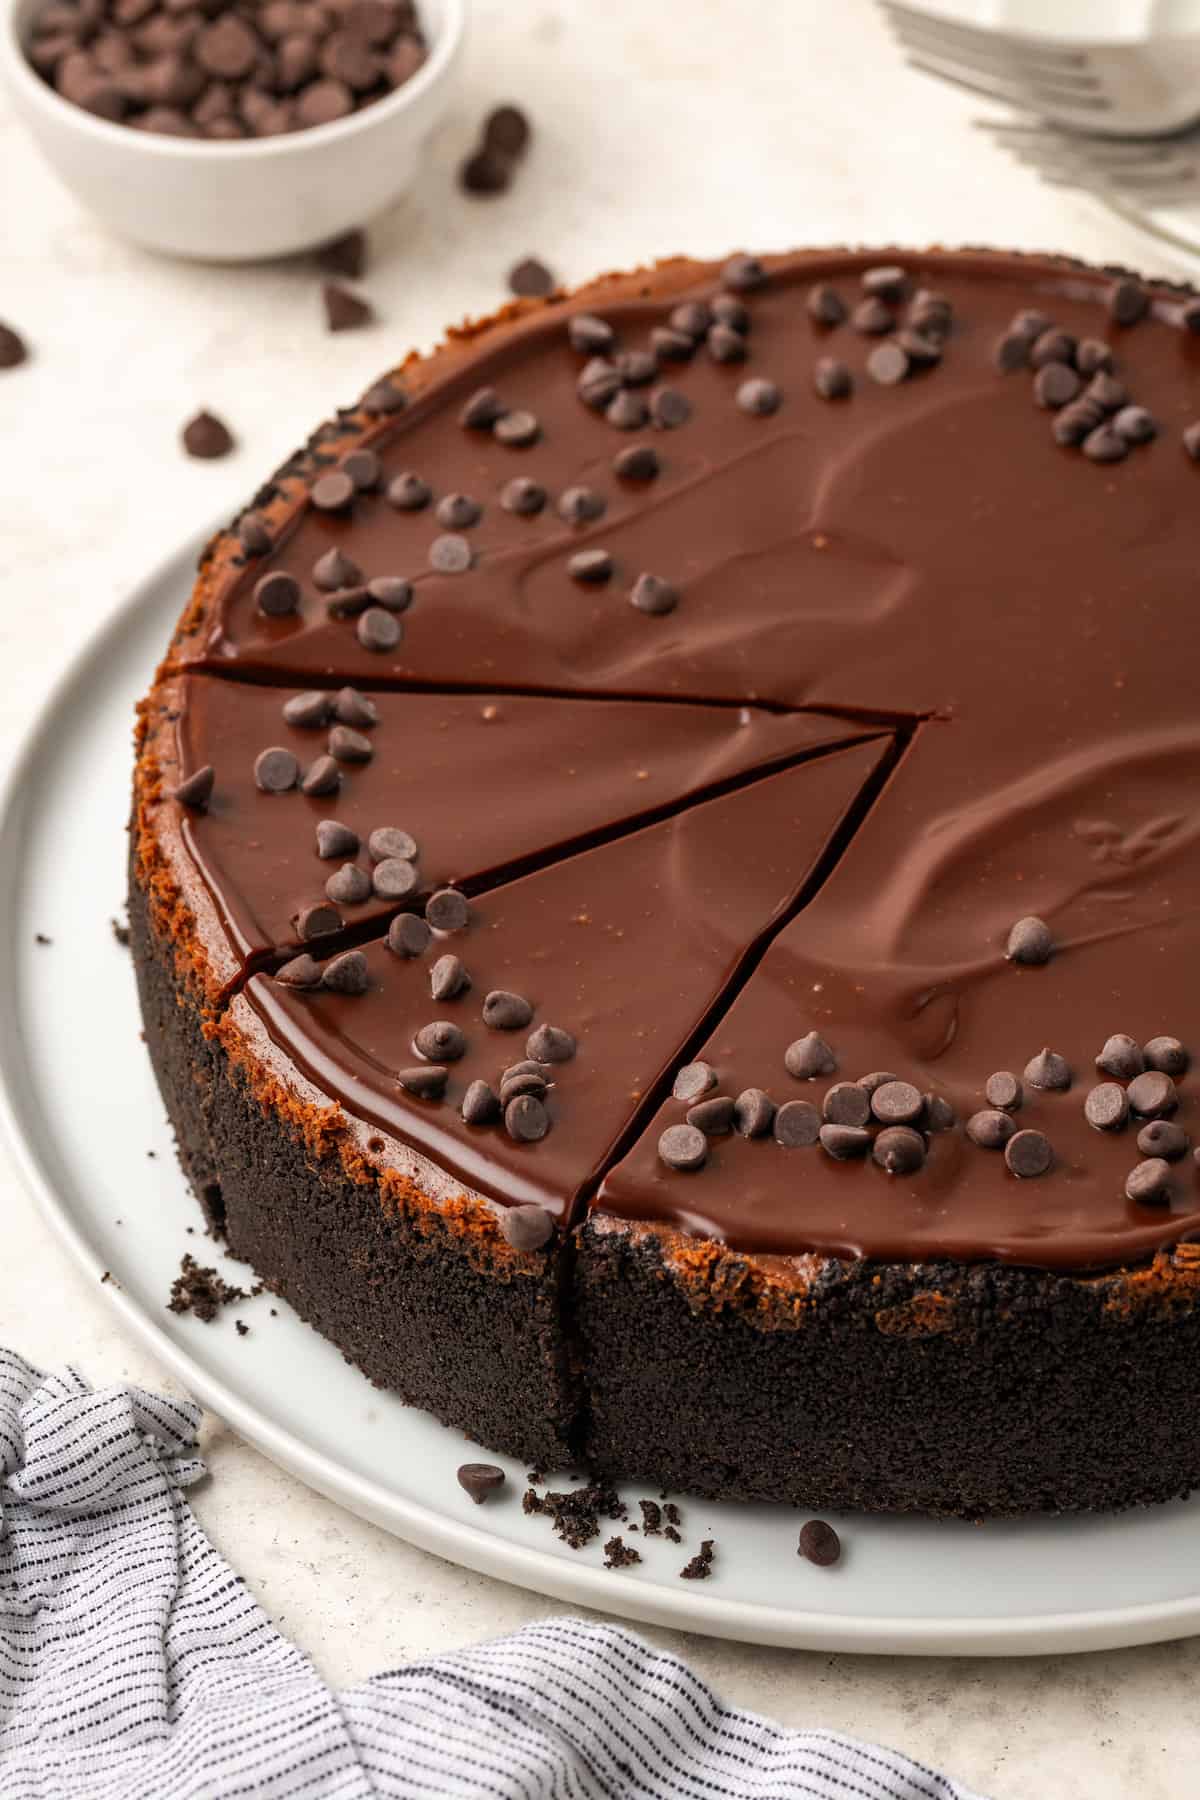 Chocolate cheesecake is shown topped with ganache and chocolate chips.